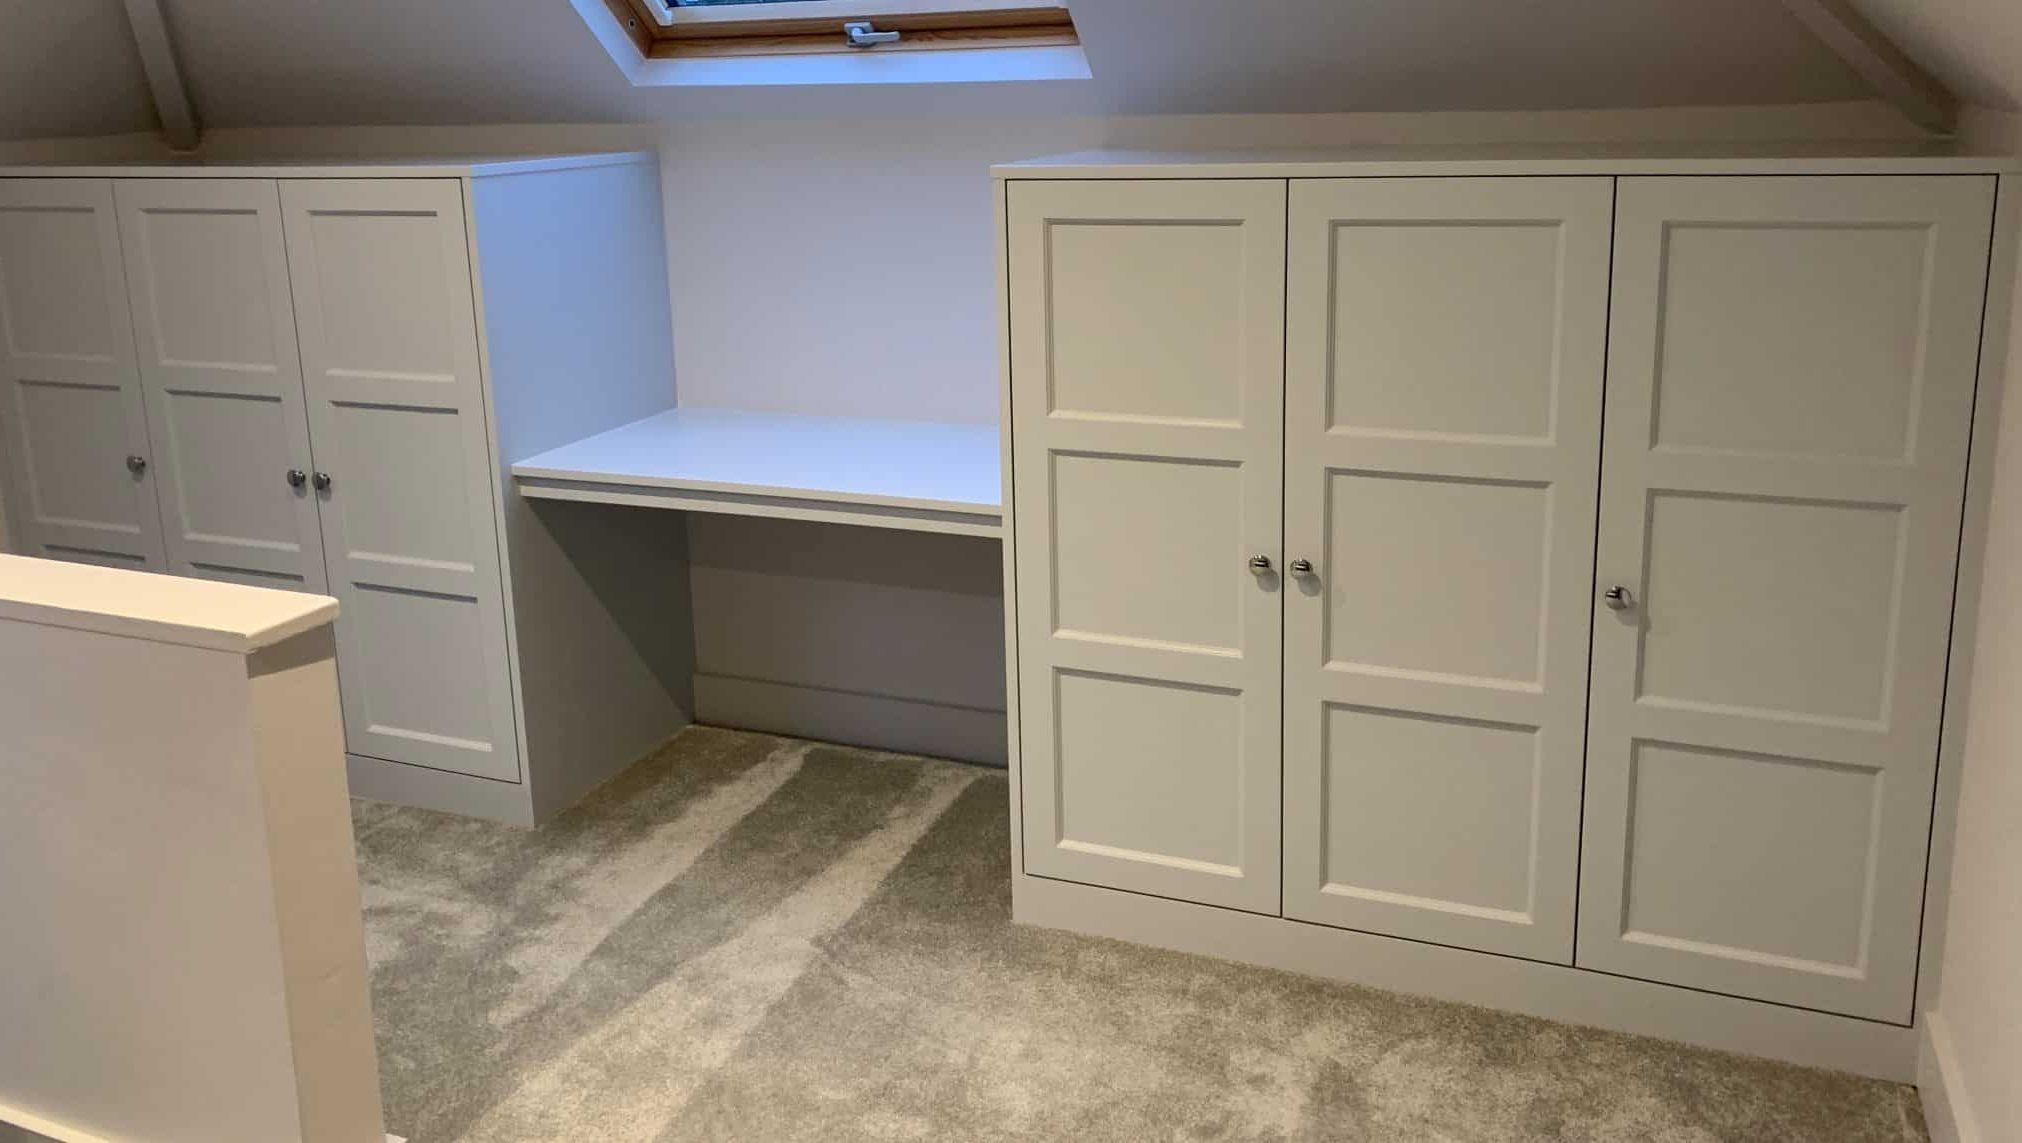 Low Ceiling Attic Wardrobes | Fitted Wardrobes For Sloping Ceilings With Regard To Short Wardrobes (Gallery 12 of 20)